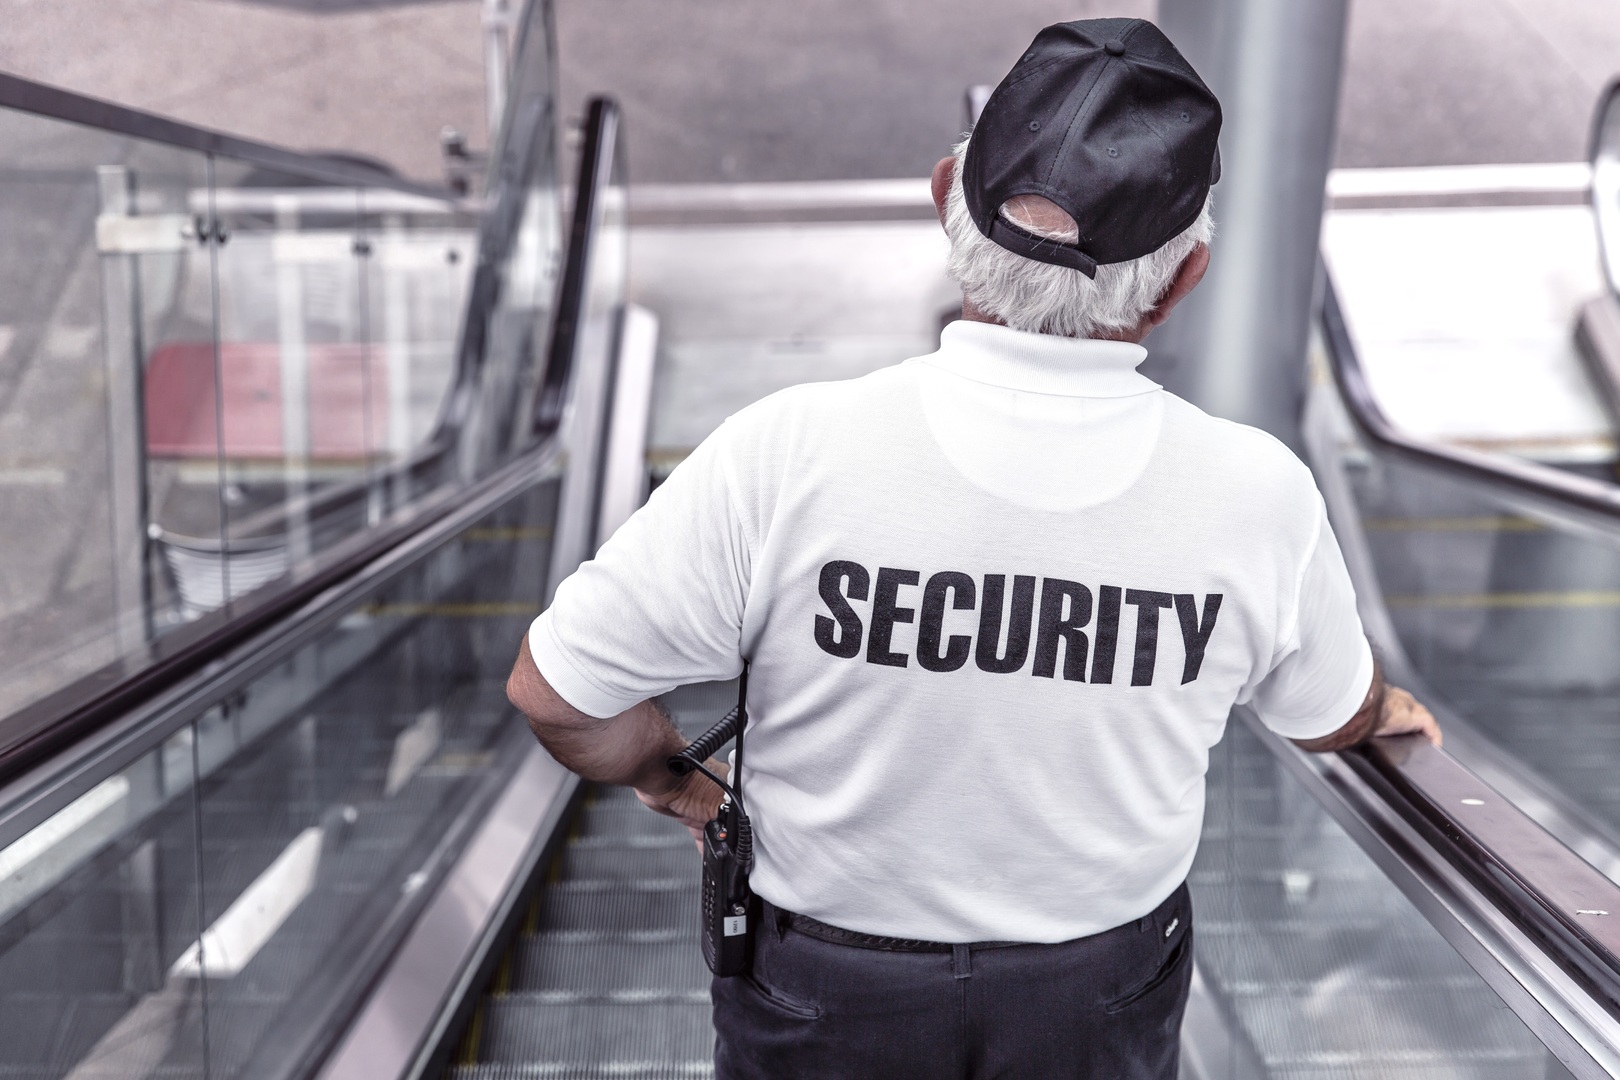 A security officer using an escalator | Source: pxhere